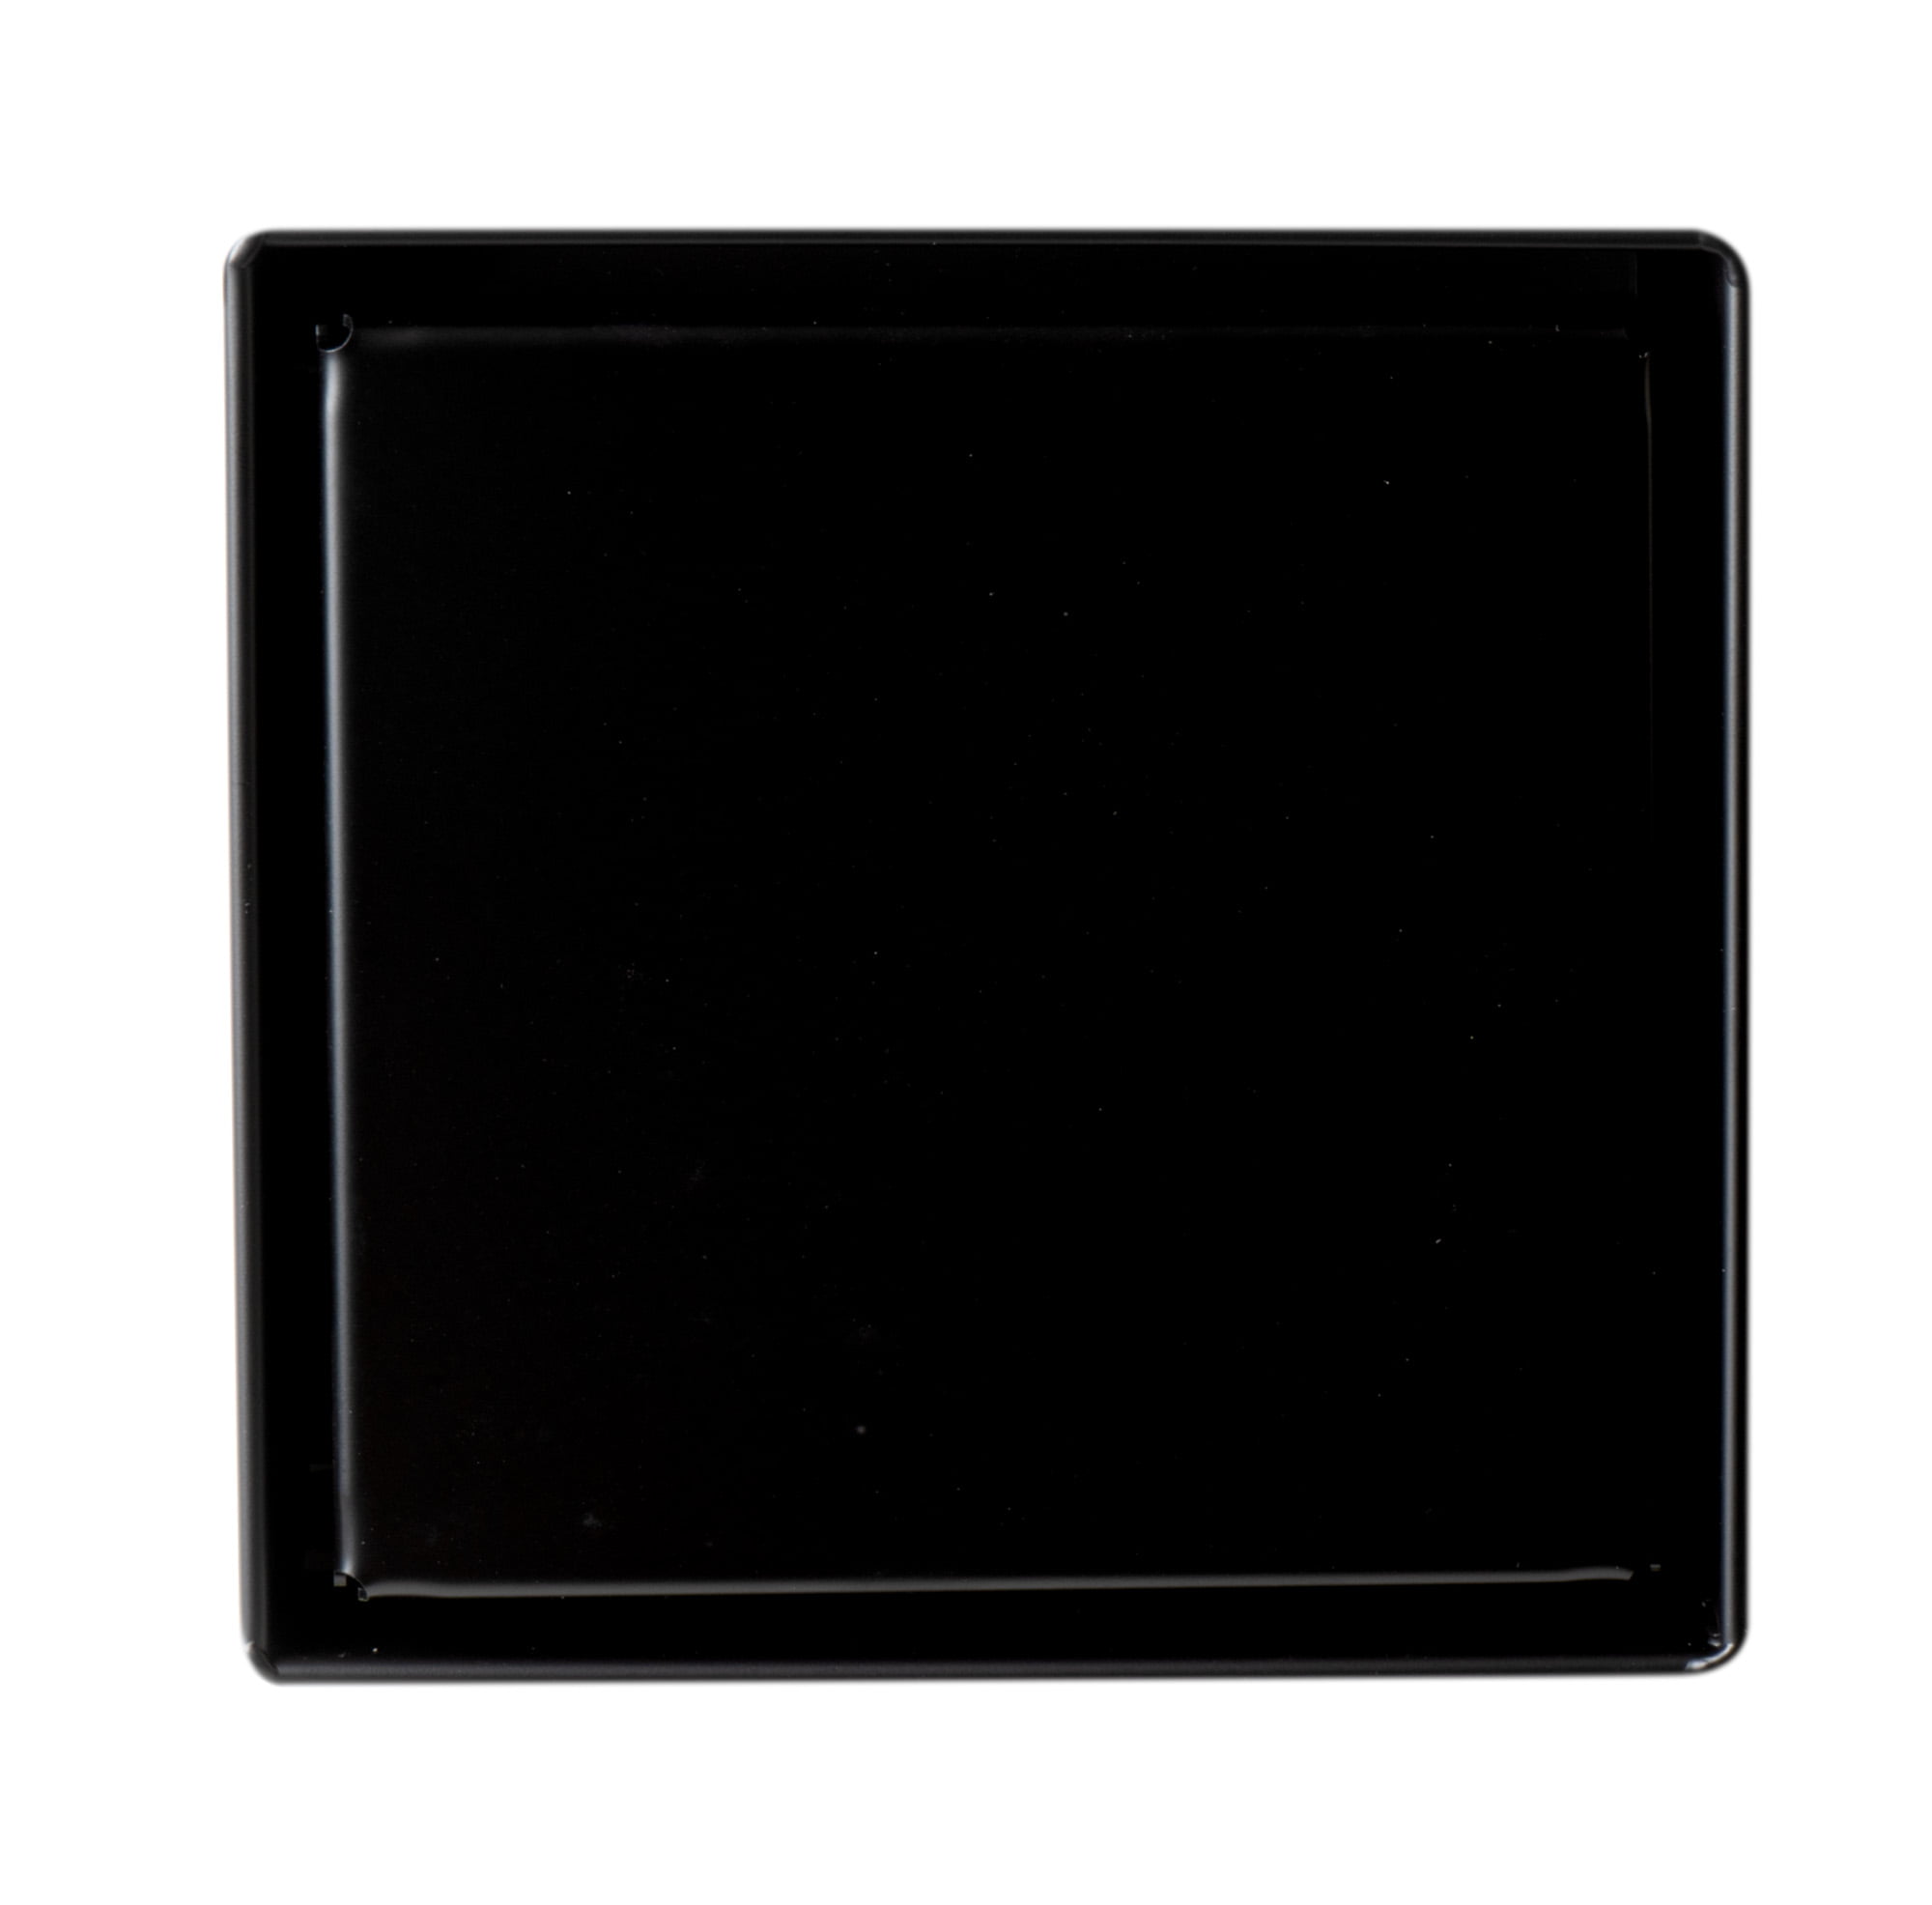 Absd55b-bm 5 X 5 In. Square Stainless Steel Shower Drain With Solid Cover, Black Matte